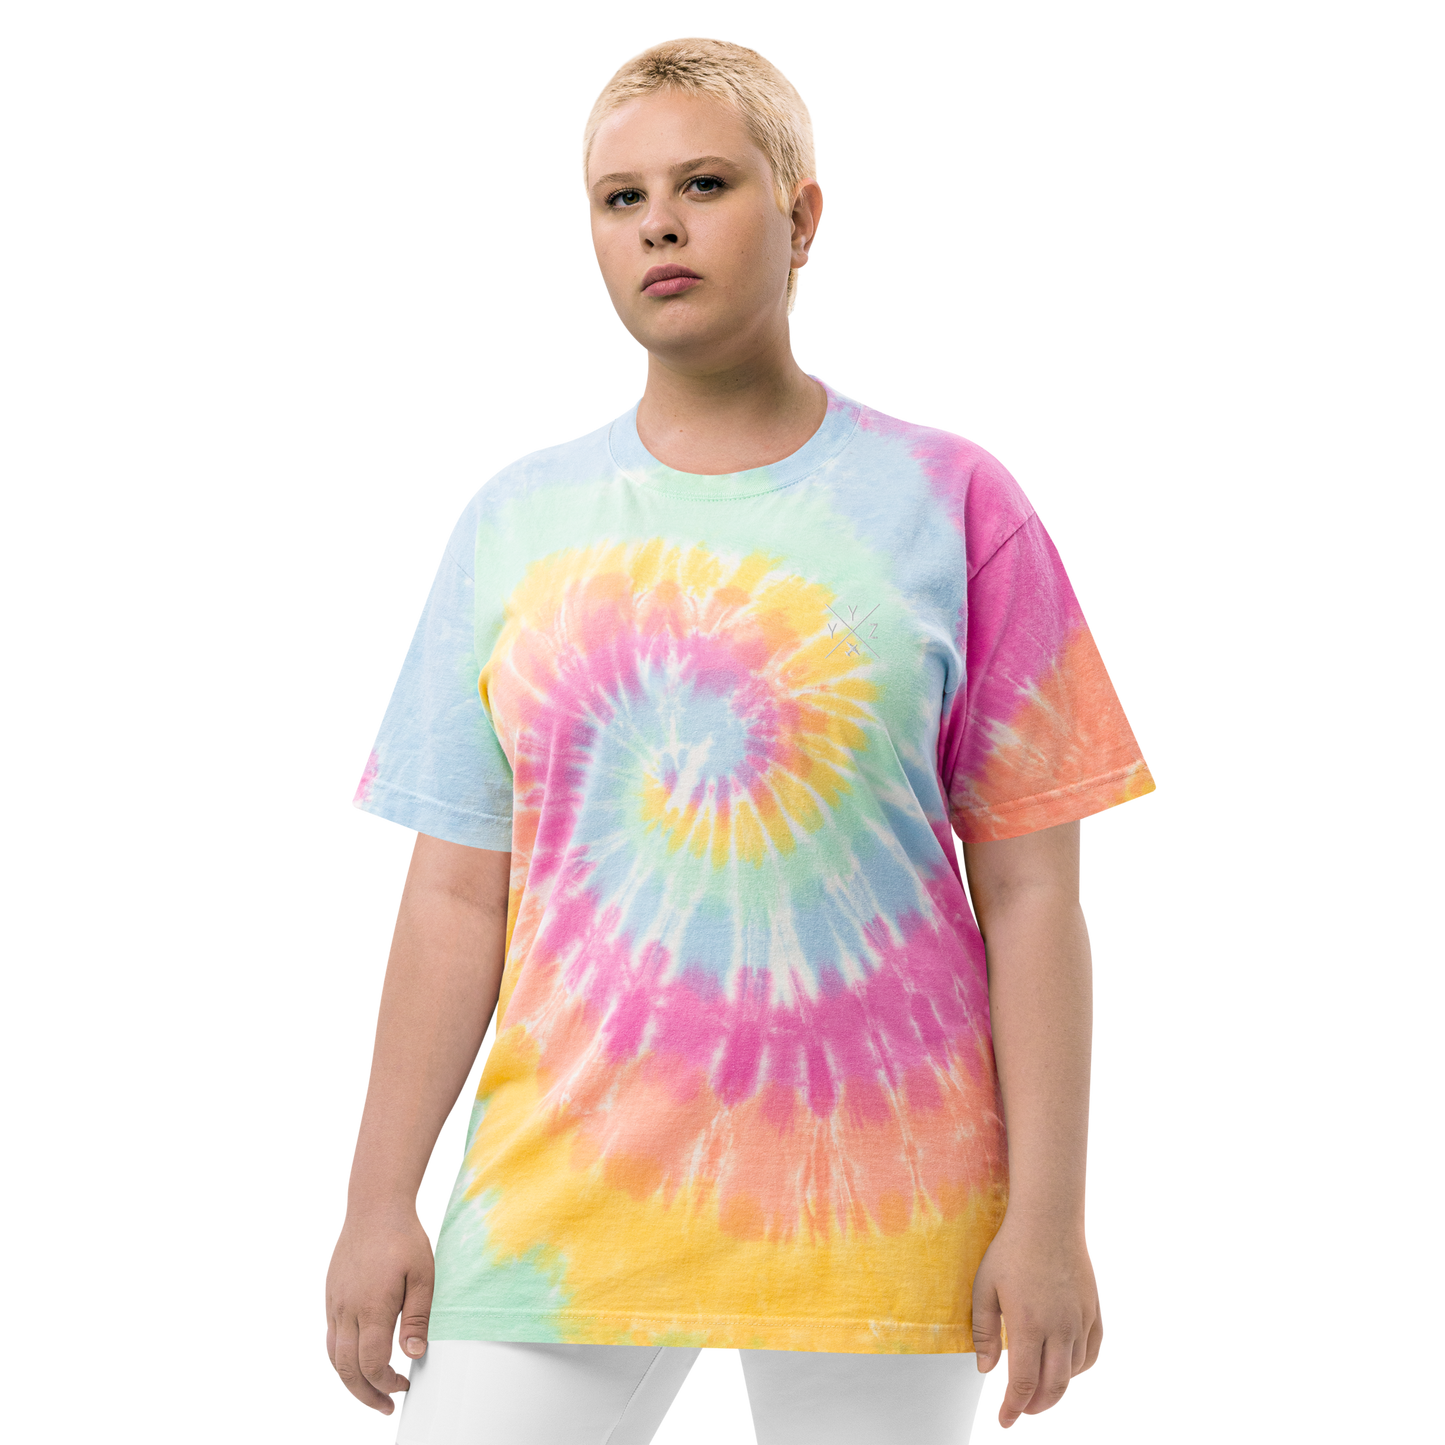 YHM Designs - YYZ Toronto Oversized Tie-Dye T-Shirt - Crossed-X Design with Airport Code and Vintage Propliner - White Embroidery - Image 11